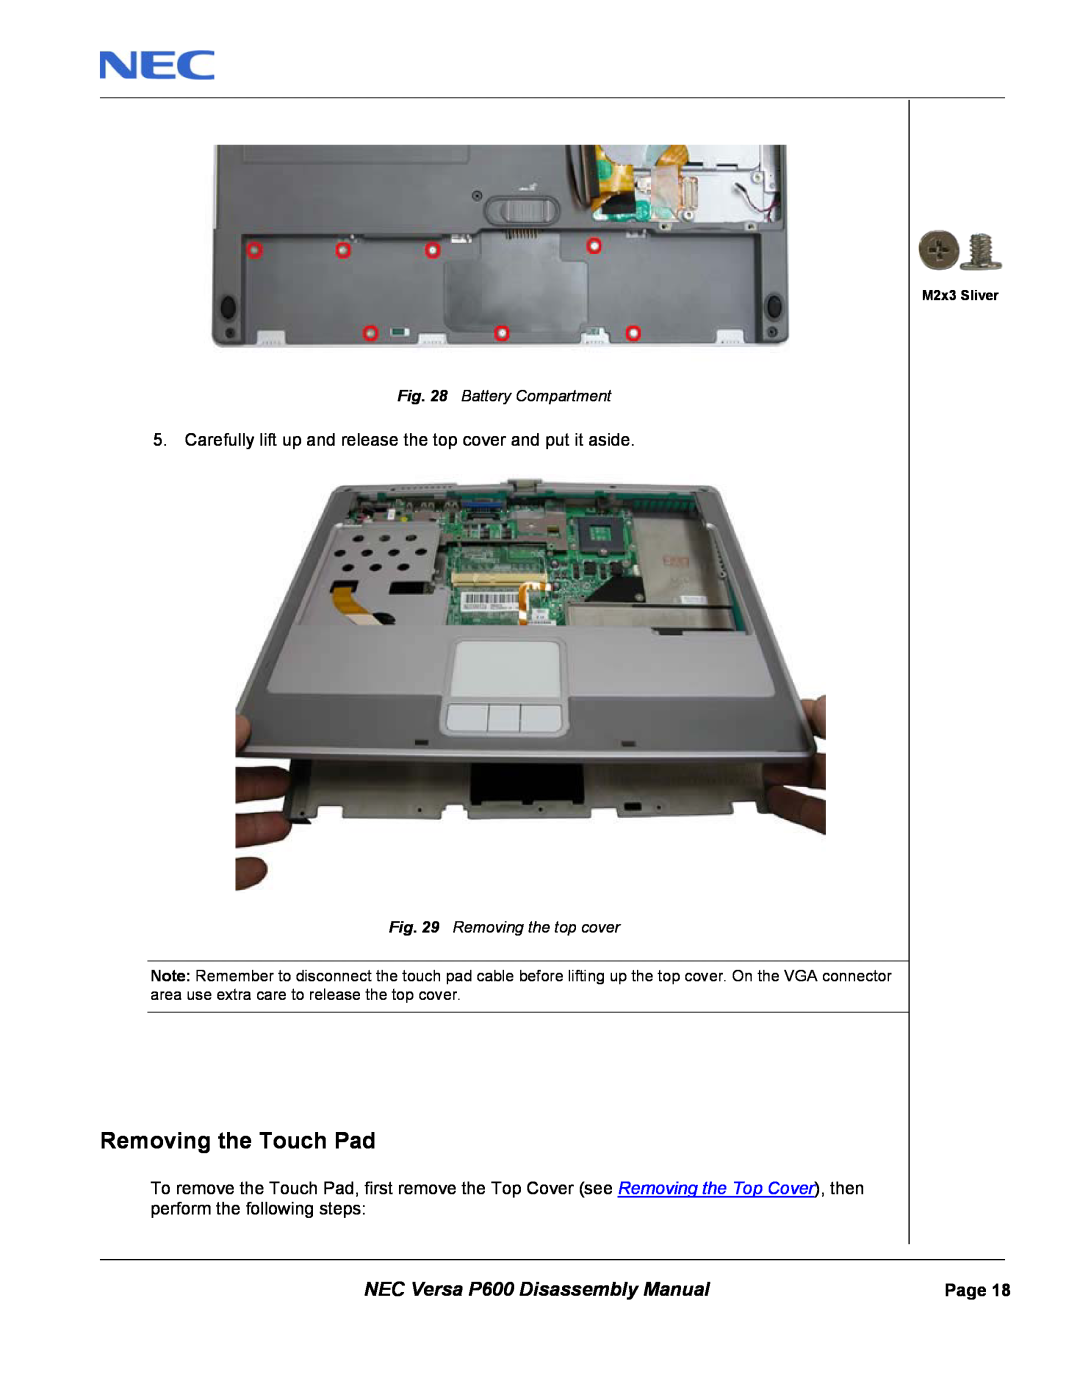 NEC manual Removing the Touch Pad, NEC Versa P600 Disassembly Manual, Battery Compartment, Removing the top cover 